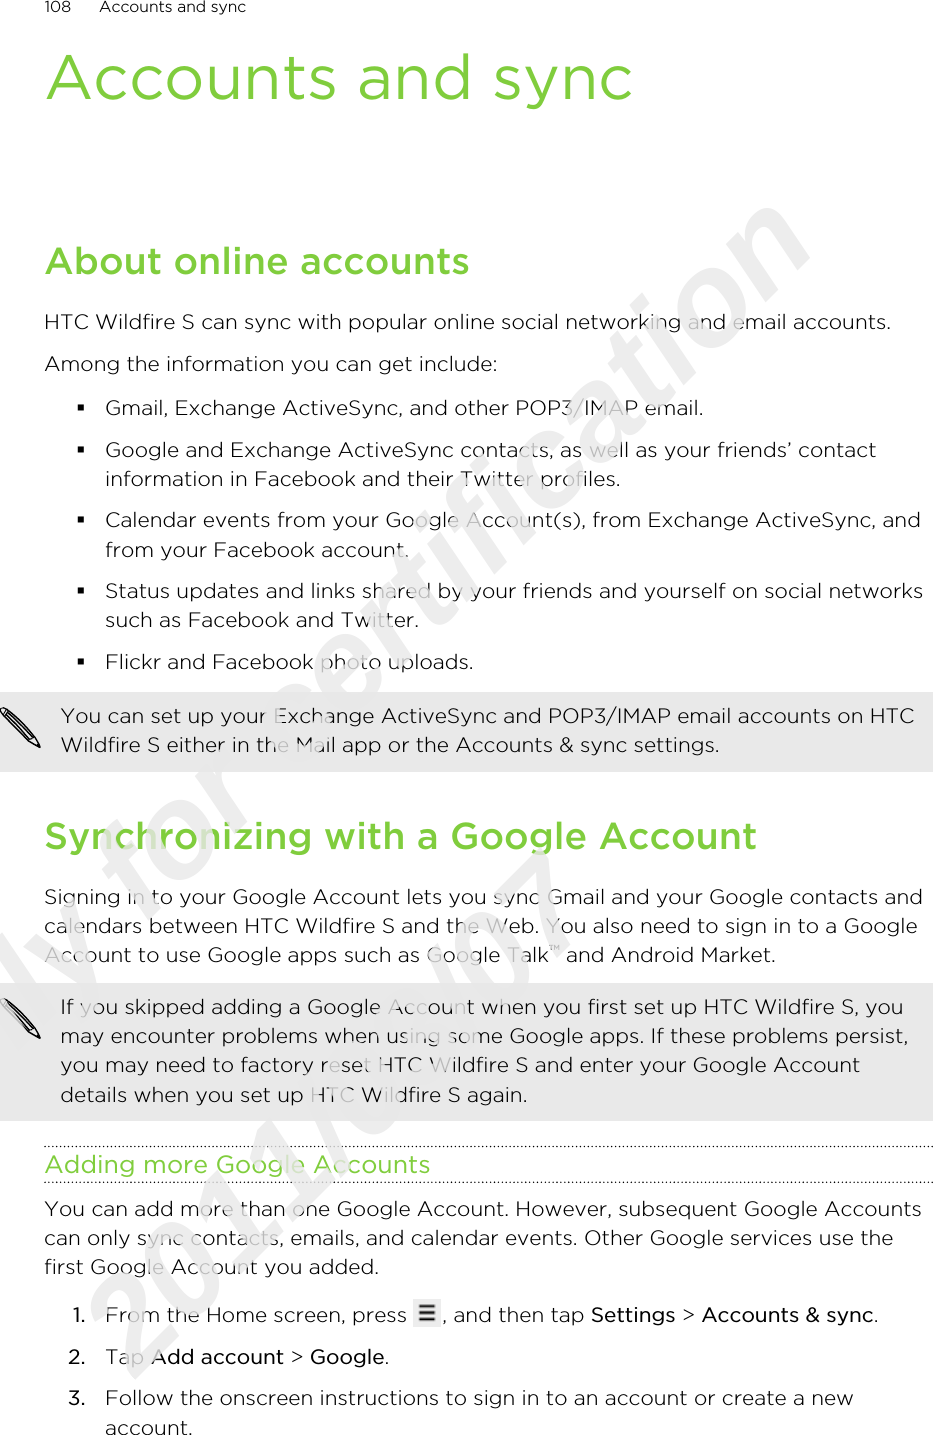 Accounts and syncAbout online accountsHTC Wildfire S can sync with popular online social networking and email accounts.Among the information you can get include:§Gmail, Exchange ActiveSync, and other POP3/IMAP email.§Google and Exchange ActiveSync contacts, as well as your friends’ contactinformation in Facebook and their Twitter profiles.§Calendar events from your Google Account(s), from Exchange ActiveSync, andfrom your Facebook account.§Status updates and links shared by your friends and yourself on social networkssuch as Facebook and Twitter.§Flickr and Facebook photo uploads.You can set up your Exchange ActiveSync and POP3/IMAP email accounts on HTCWildfire S either in the Mail app or the Accounts &amp; sync settings.Synchronizing with a Google AccountSigning in to your Google Account lets you sync Gmail and your Google contacts andcalendars between HTC Wildfire S and the Web. You also need to sign in to a GoogleAccount to use Google apps such as Google Talk™ and Android Market.If you skipped adding a Google Account when you first set up HTC Wildfire S, youmay encounter problems when using some Google apps. If these problems persist,you may need to factory reset HTC Wildfire S and enter your Google Accountdetails when you set up HTC Wildfire S again.Adding more Google AccountsYou can add more than one Google Account. However, subsequent Google Accountscan only sync contacts, emails, and calendar events. Other Google services use thefirst Google Account you added.1. From the Home screen, press  , and then tap Settings &gt; Accounts &amp; sync.2. Tap Add account &gt; Google.3. Follow the onscreen instructions to sign in to an account or create a newaccount.108 Accounts and syncOnly for certification  2011/03/07